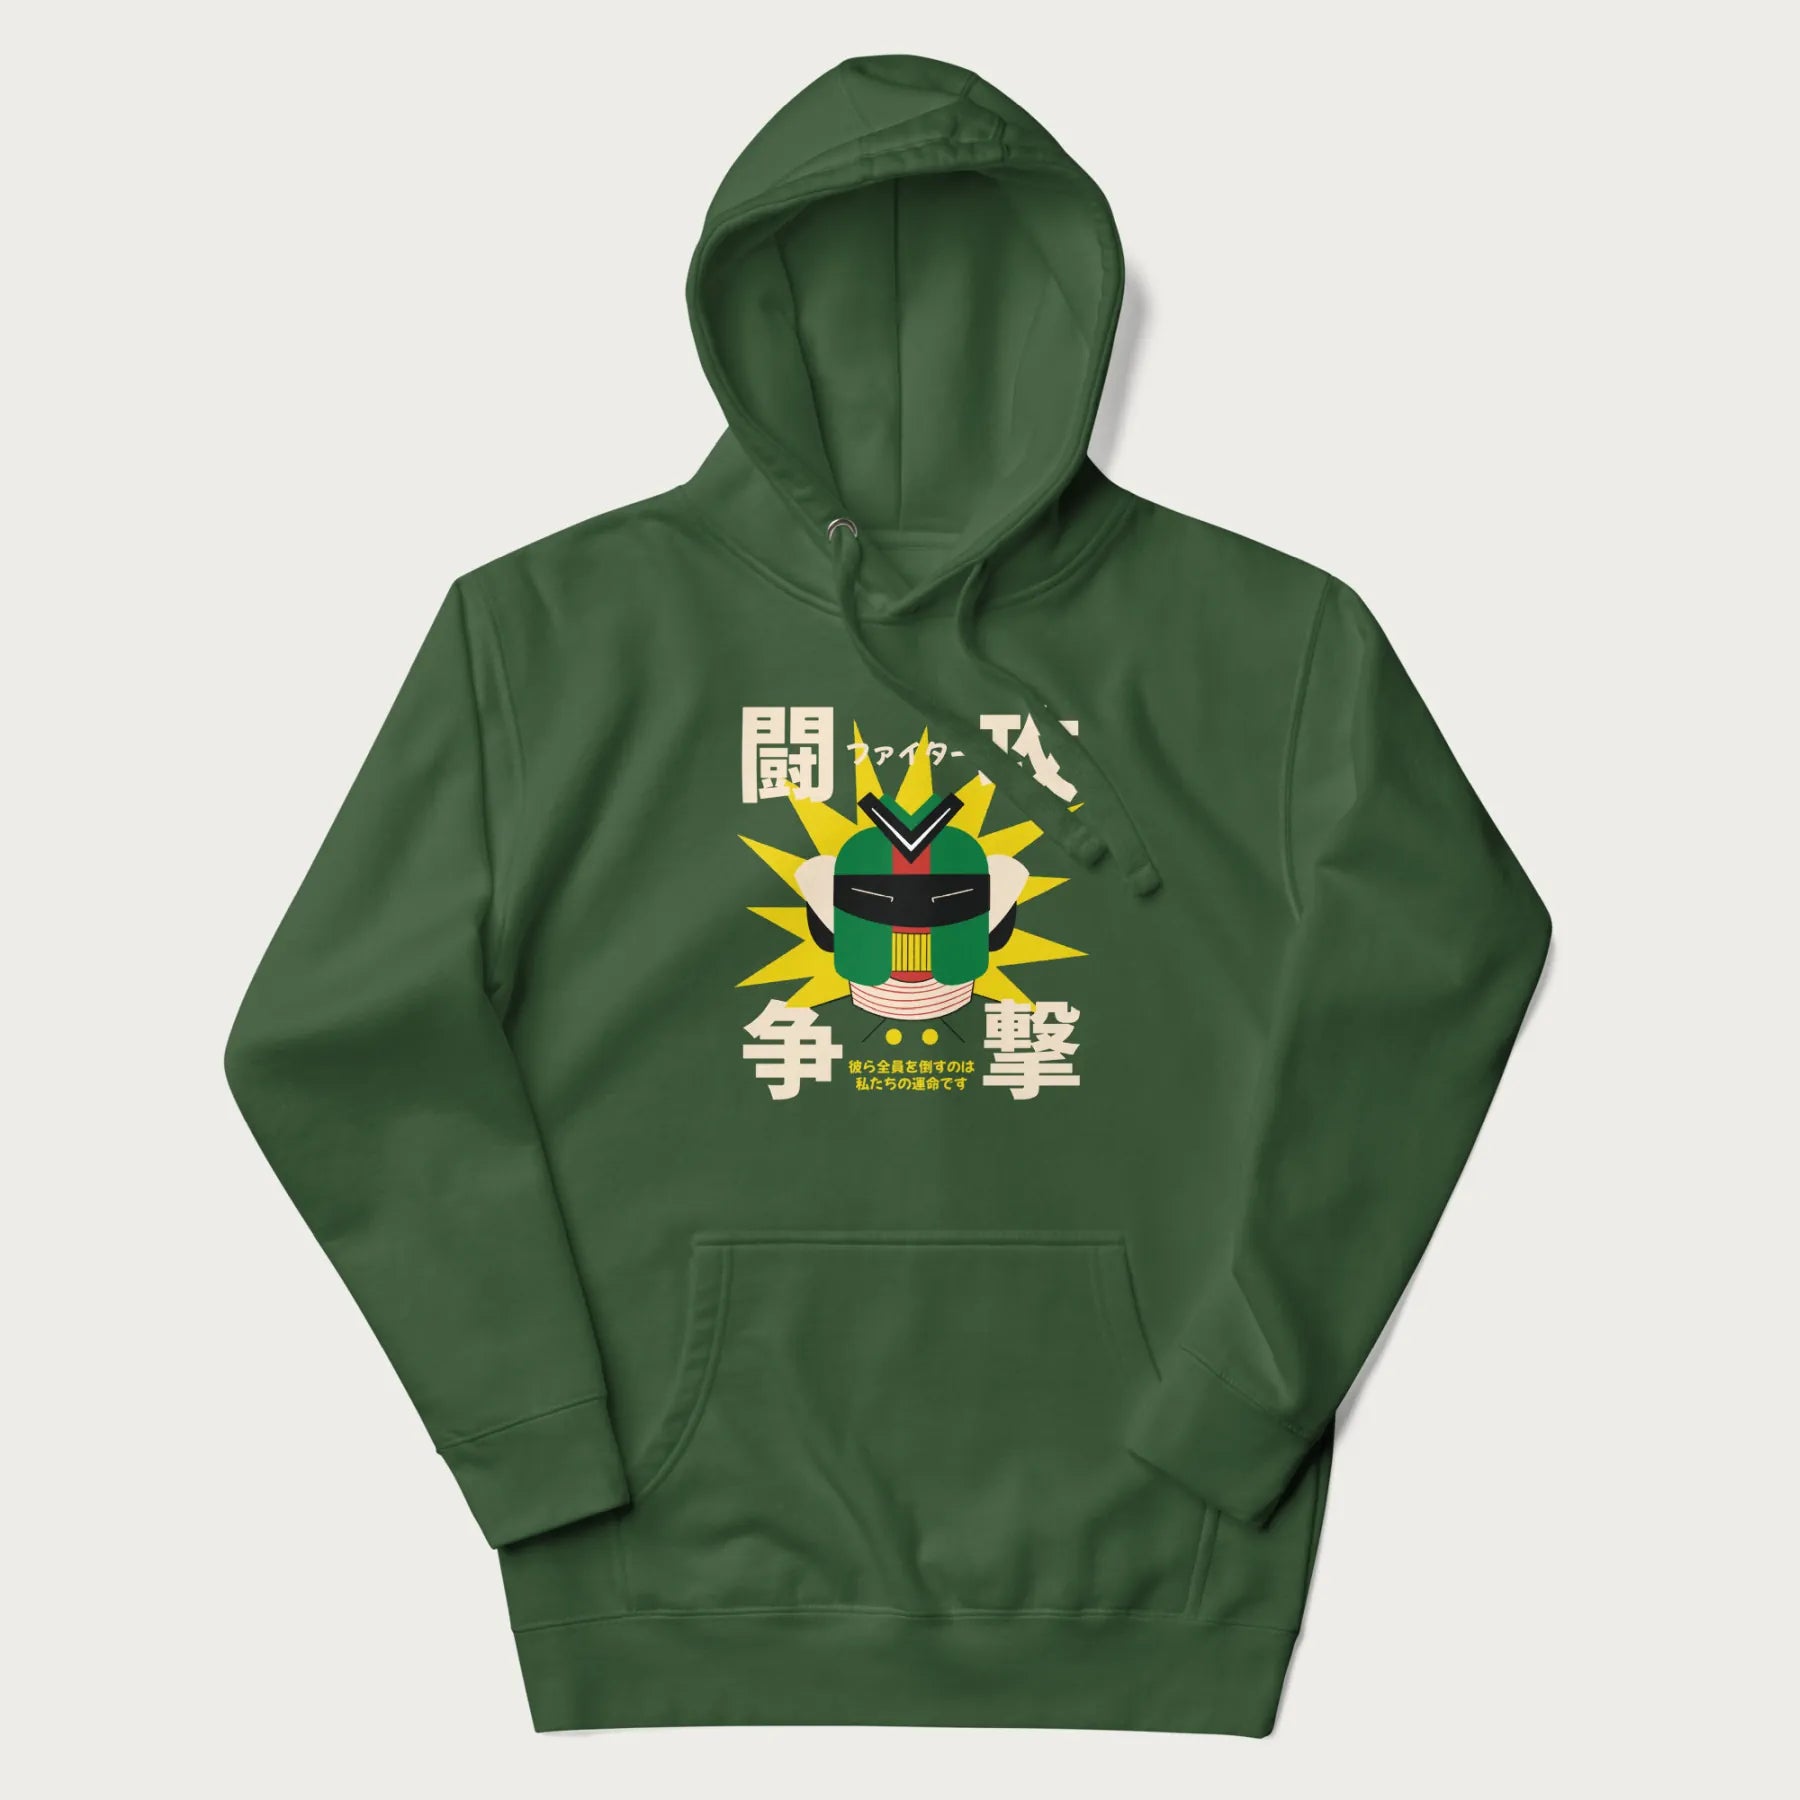 Forest green hoodie with retro graphic of a mecha warrior and Japanese text for "Fight," "Attack," "Conflict," and "Destiny to defeat them all".